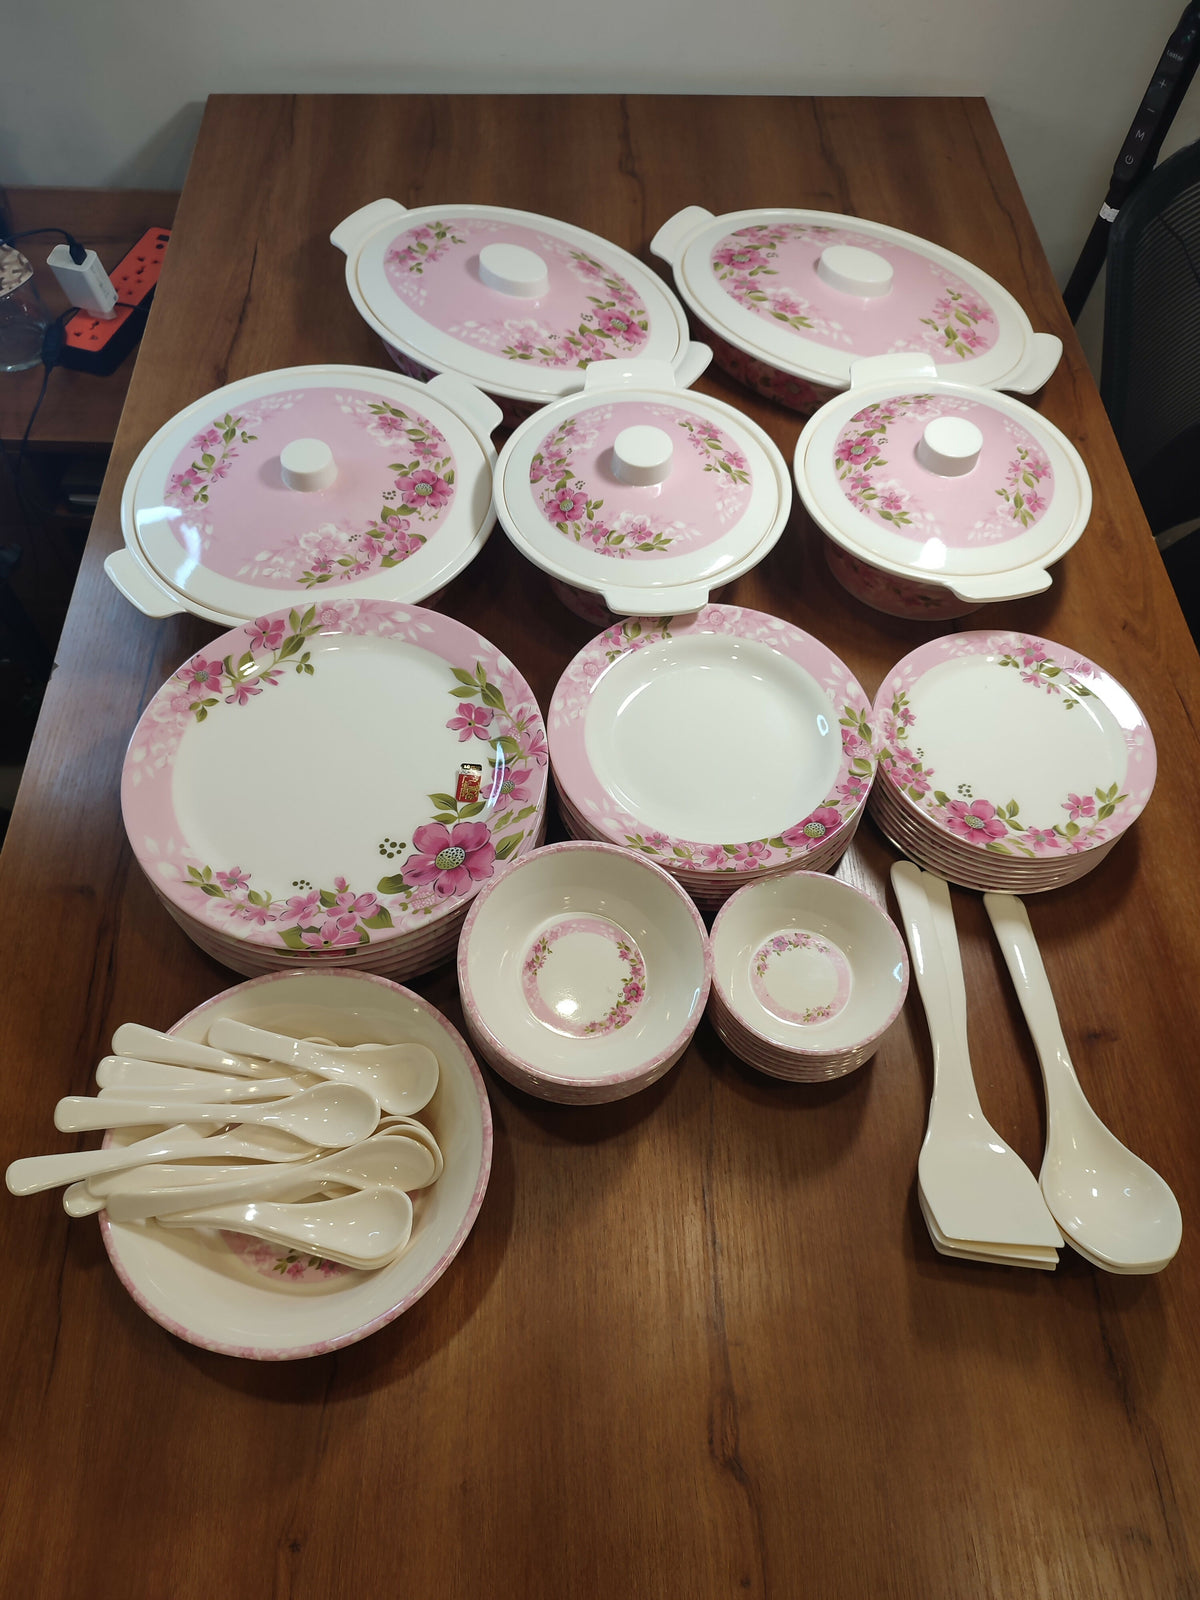 Melamine dinner set - 72 Service Dinner Set 8/8 persons serving Strong quality with good Looking I,11